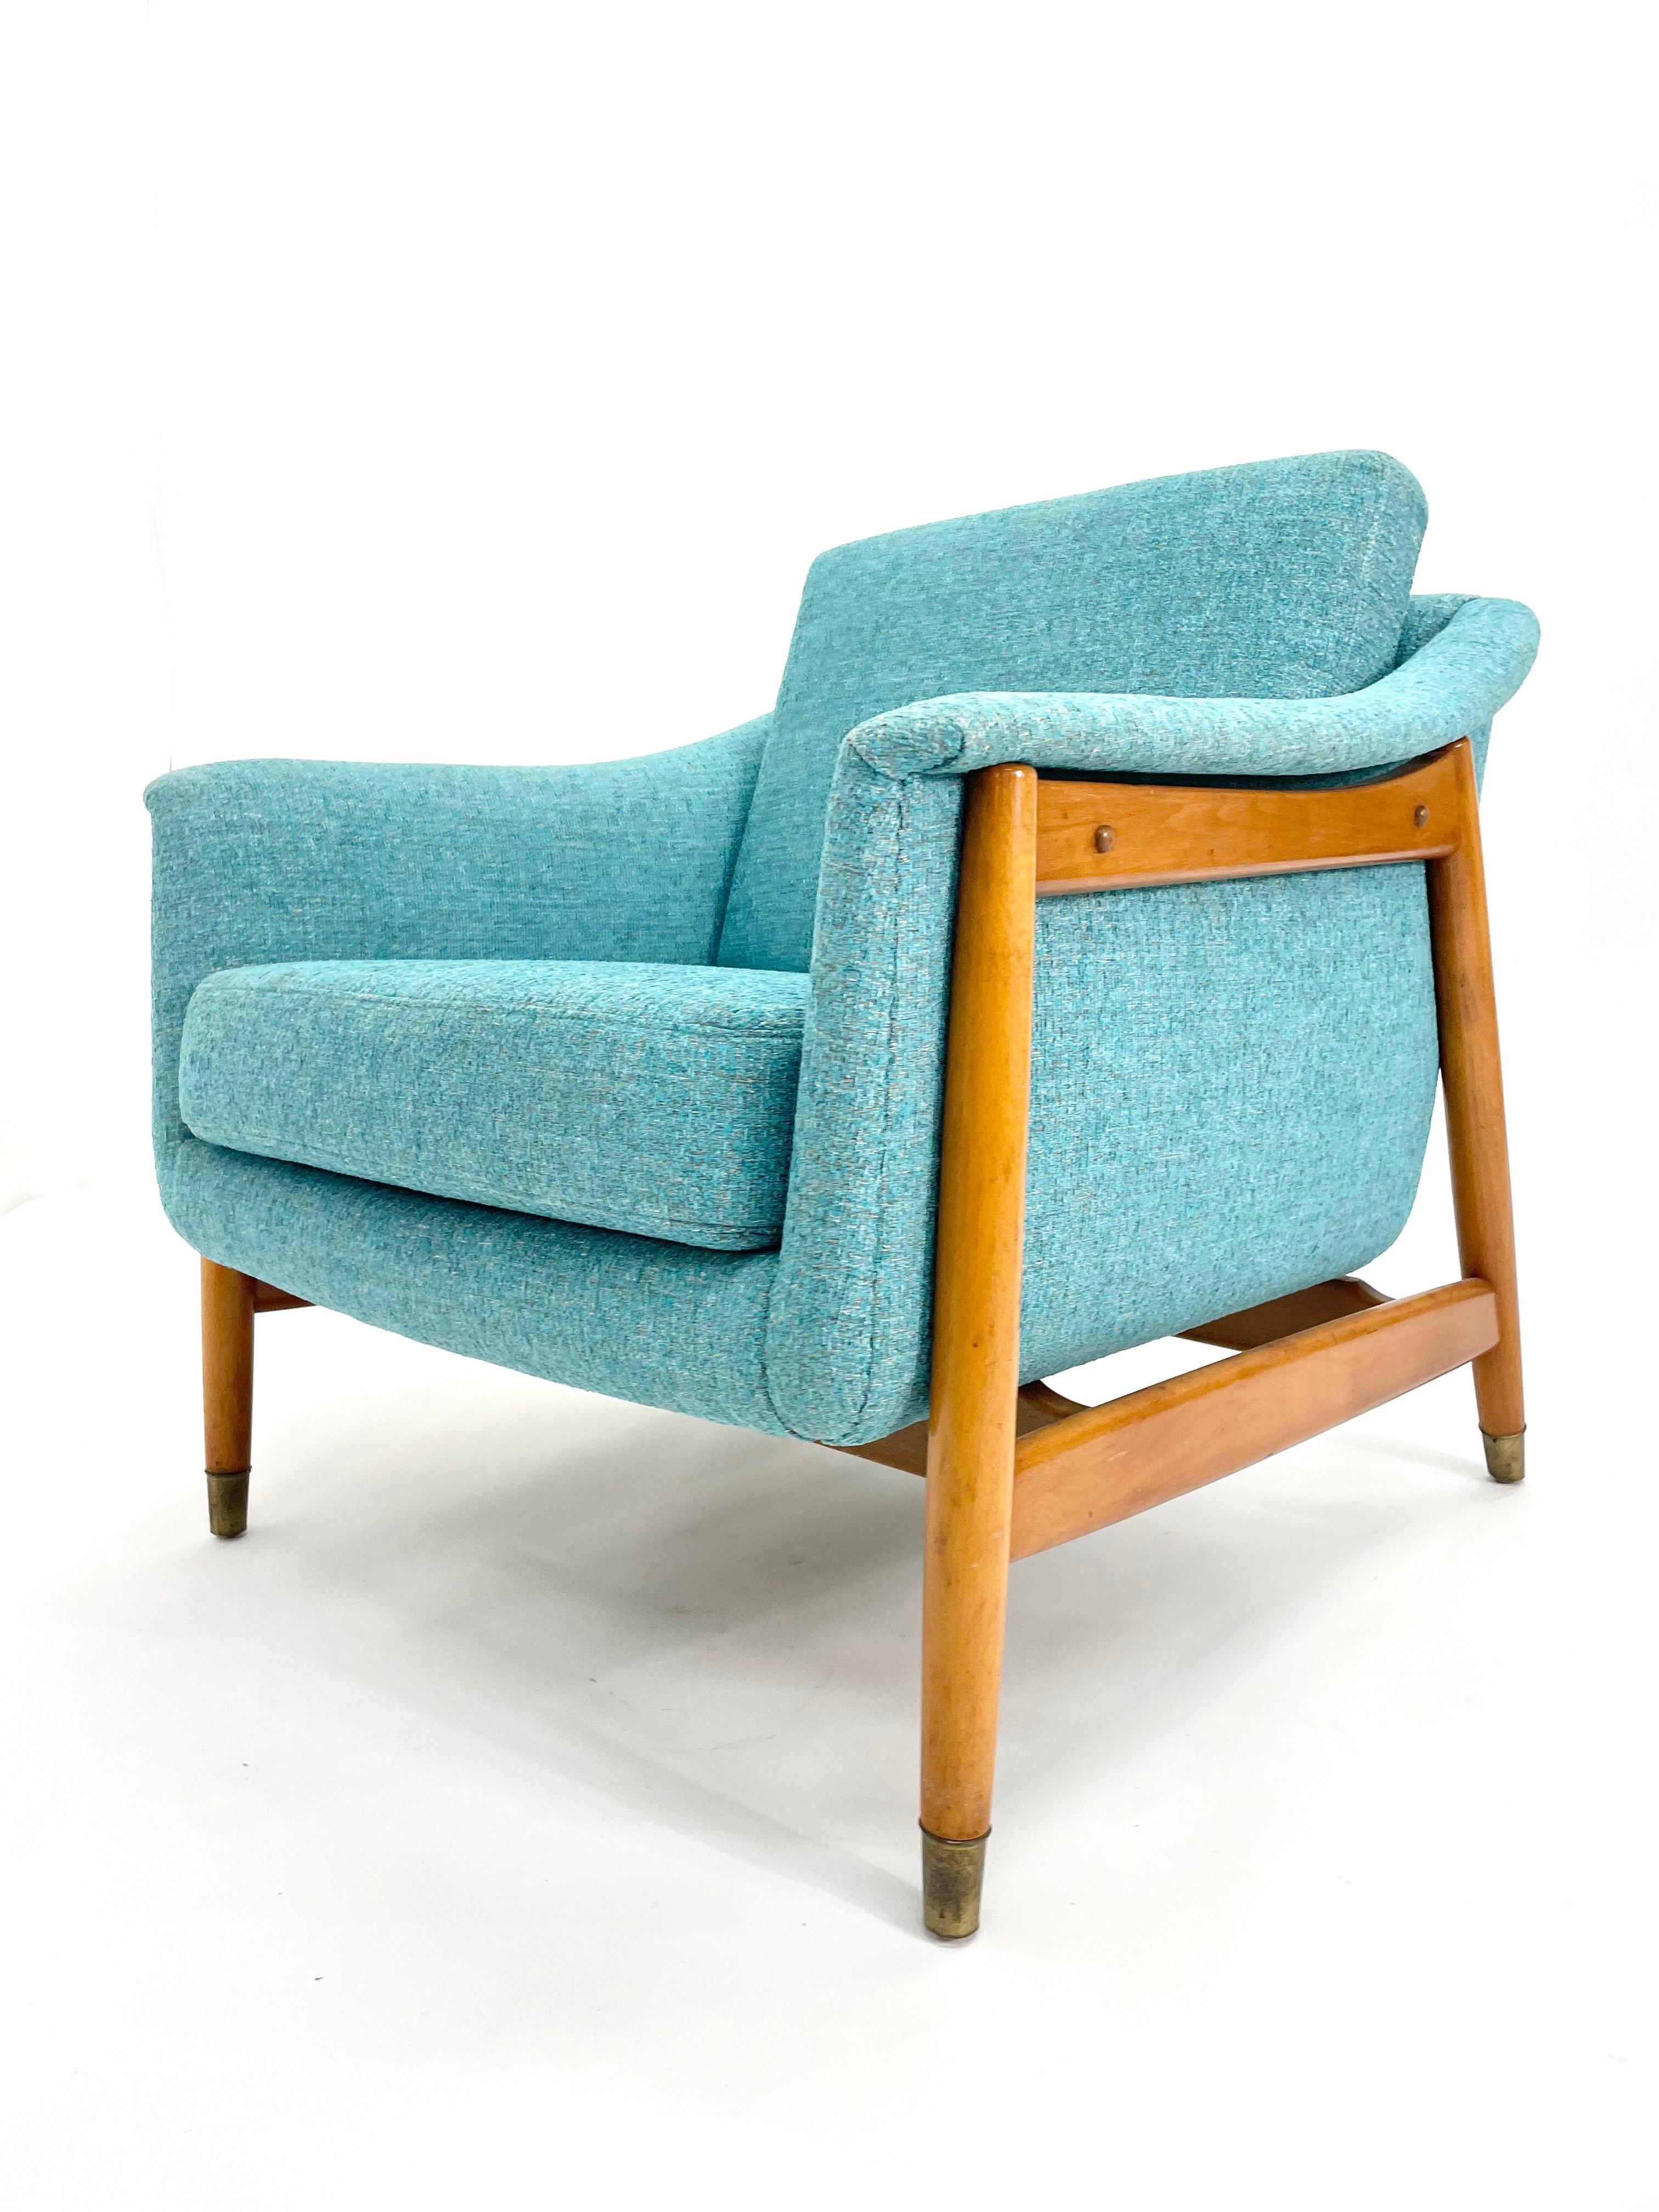 Mid-Century Modern Folke Ohlsson Lounge Chair for DUX, circa 1950s For Sale